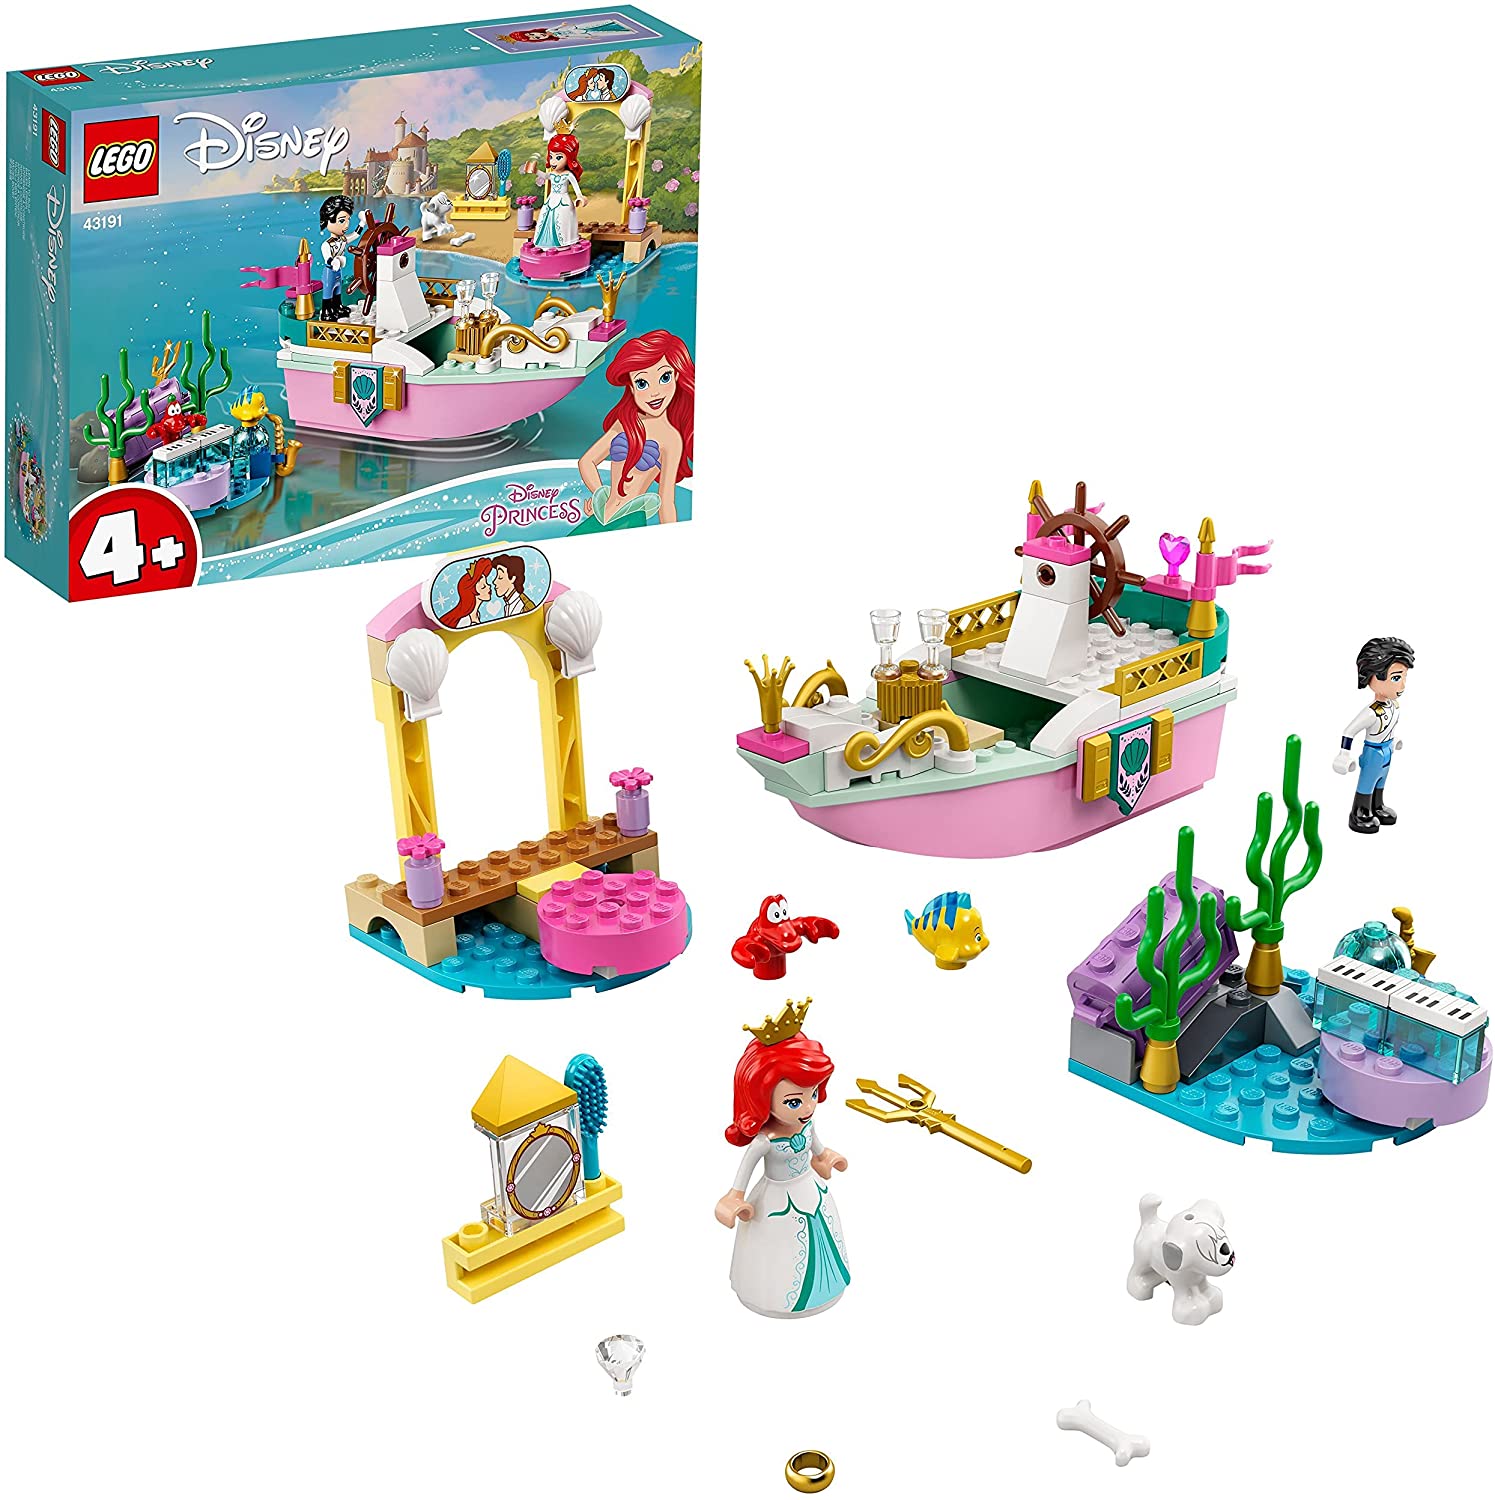 Amazon Lego store big sale - Up to 38% OFF on LEGO DOTS, Disney, Minecraft toy sets